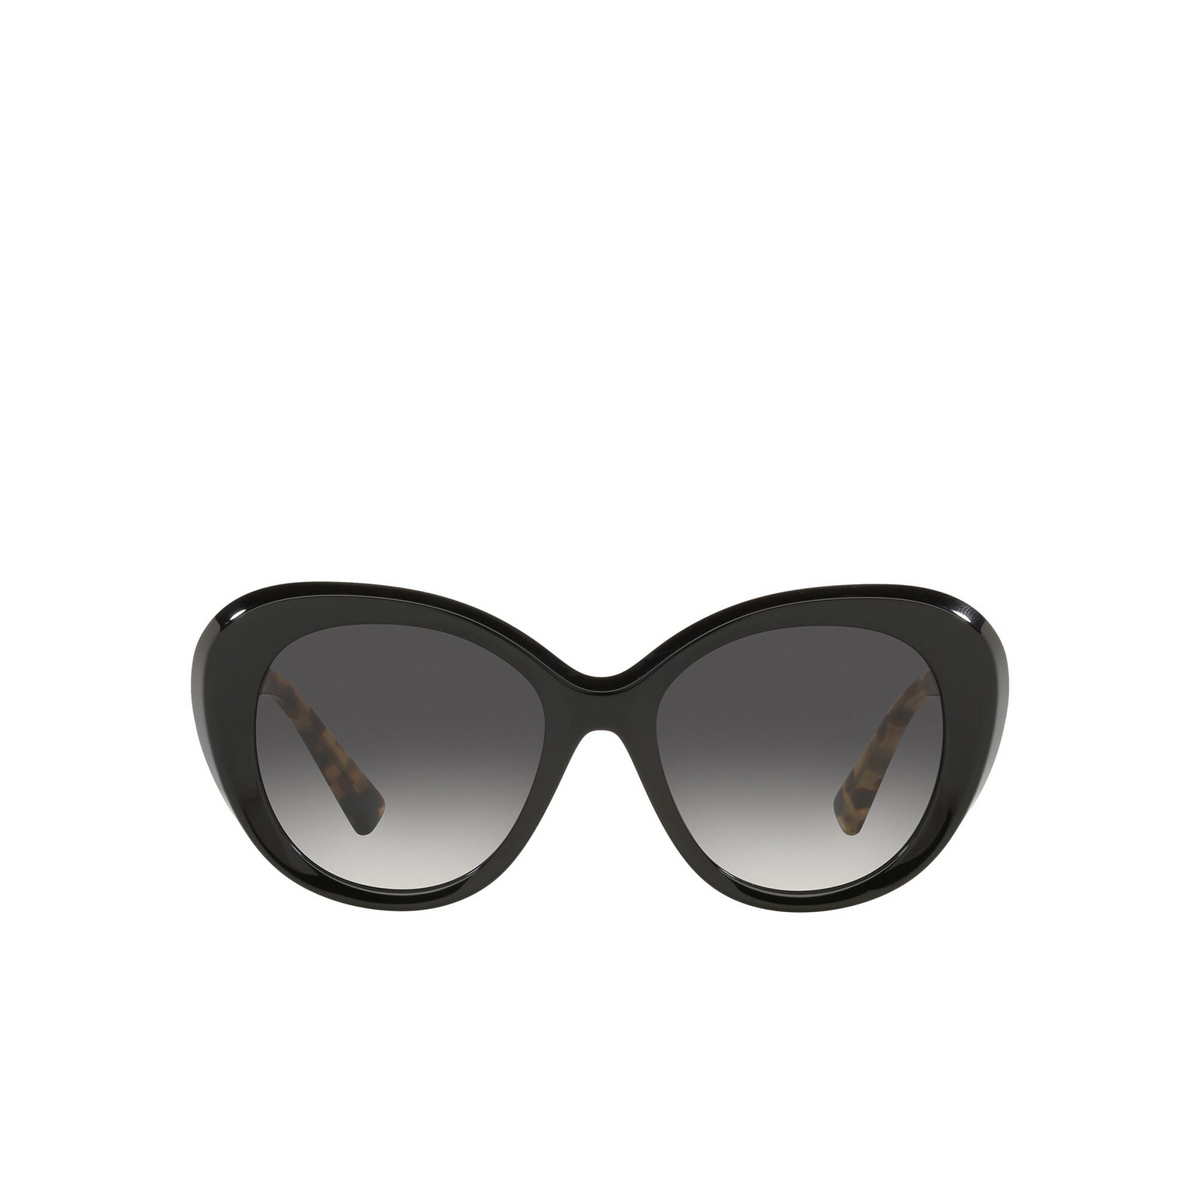 Valentino® Butterfly Sunglasses: VA4113 color Black 50018G - front view.